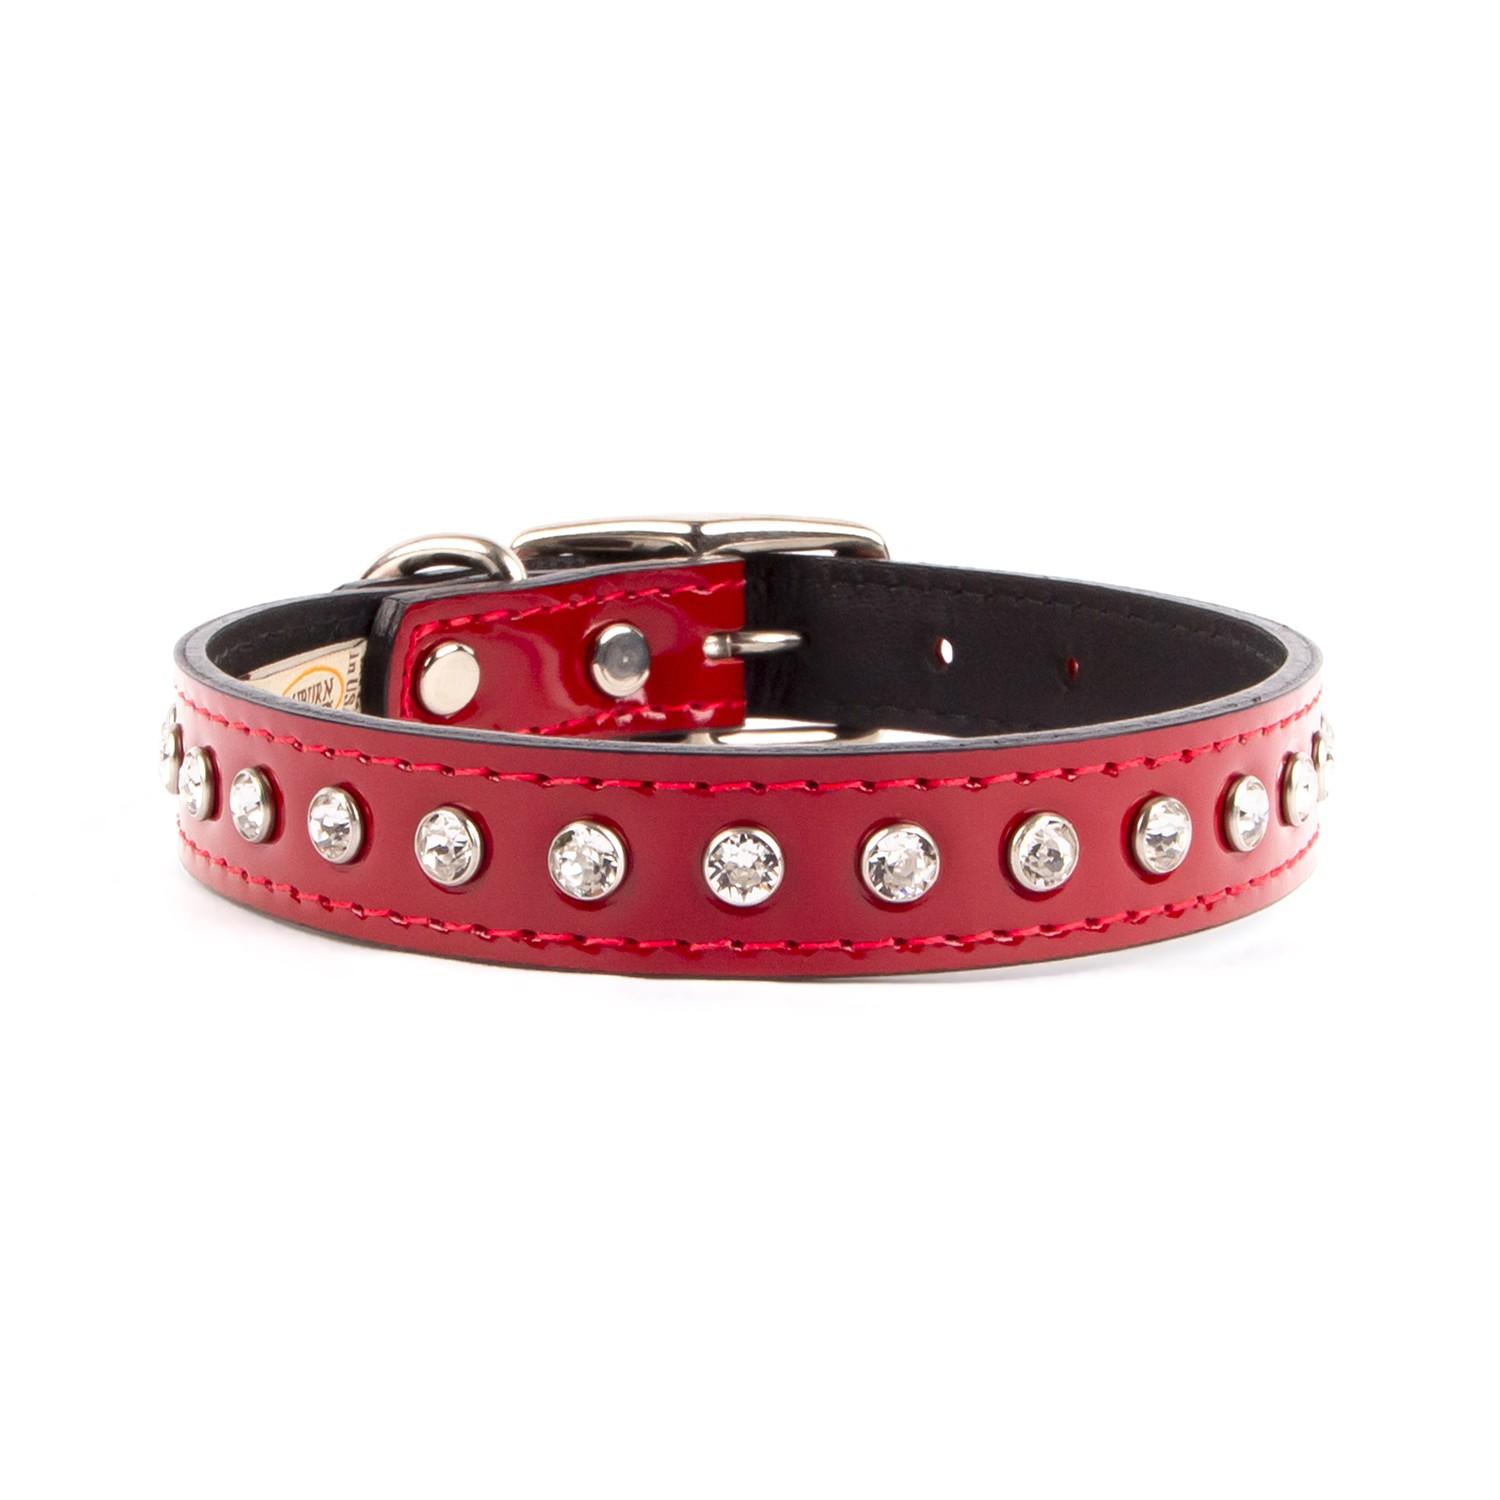 Auburn Leathercrafters Manhattan Patent Leather Dog Collar - Red 1 Row Crystalized